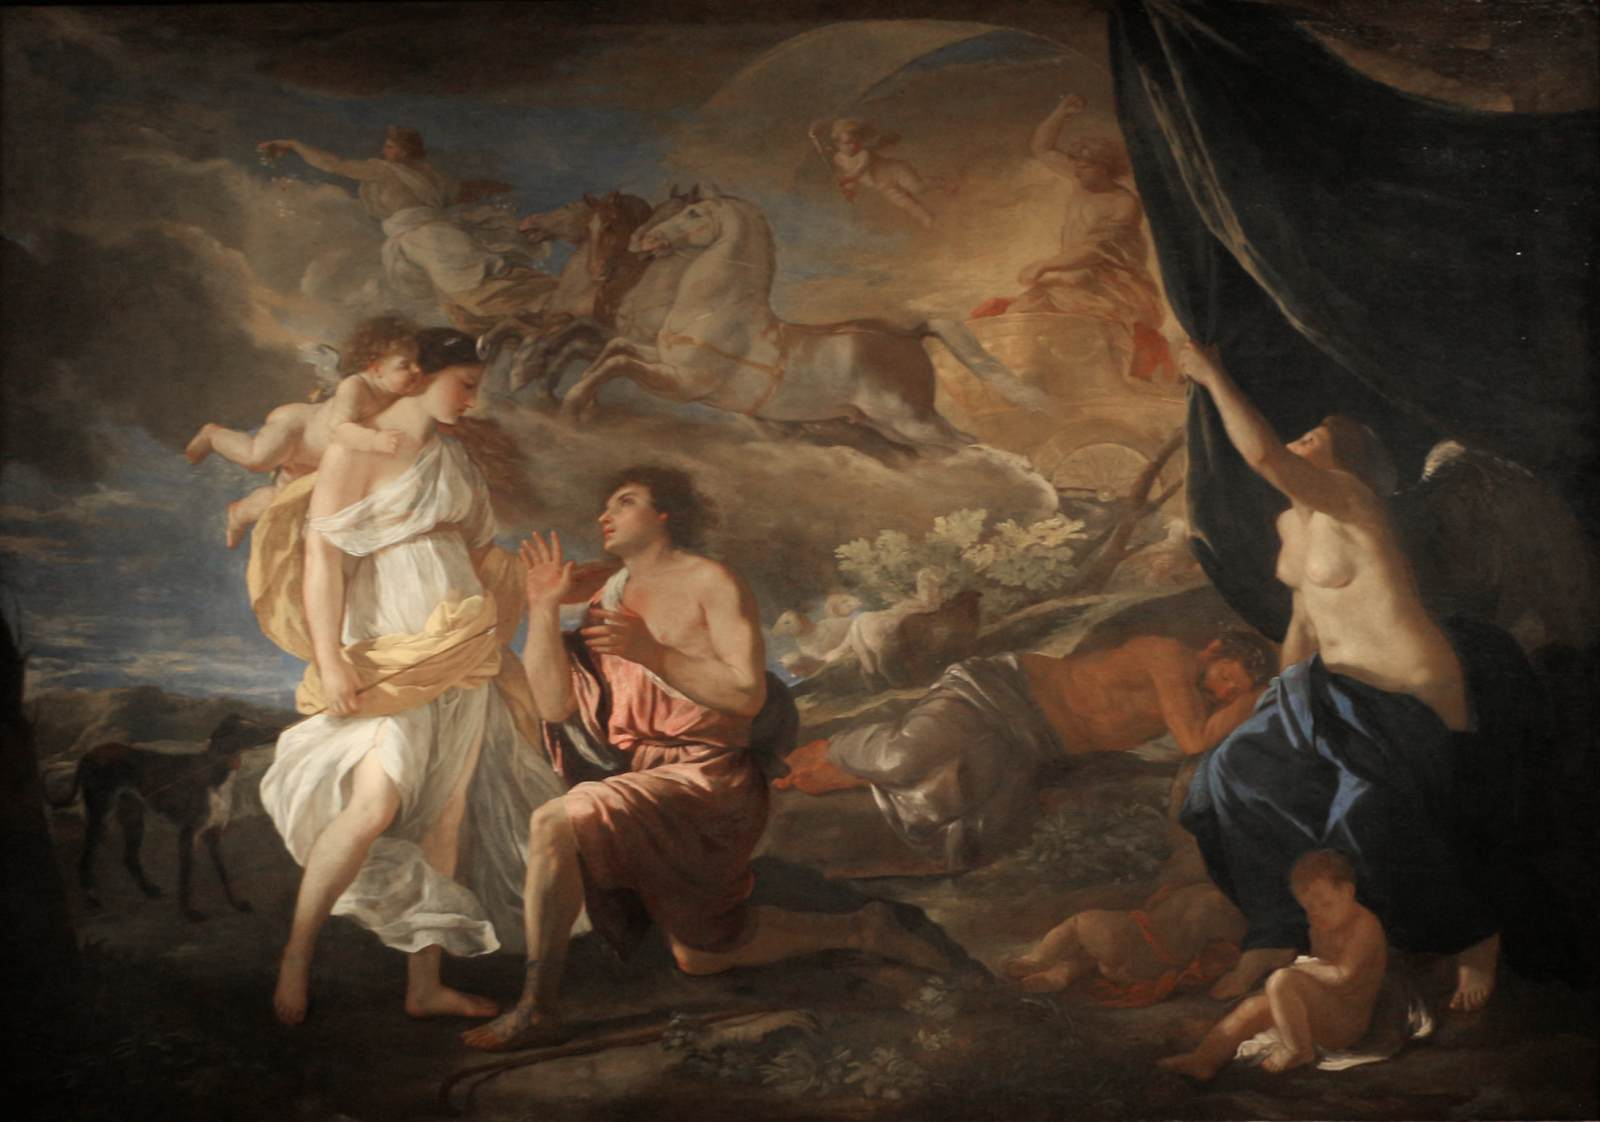 This artwork portrays Endymion kneeling before Selene, who is elegantly dressed in a white dress while he is wearing a peach-colored robe.